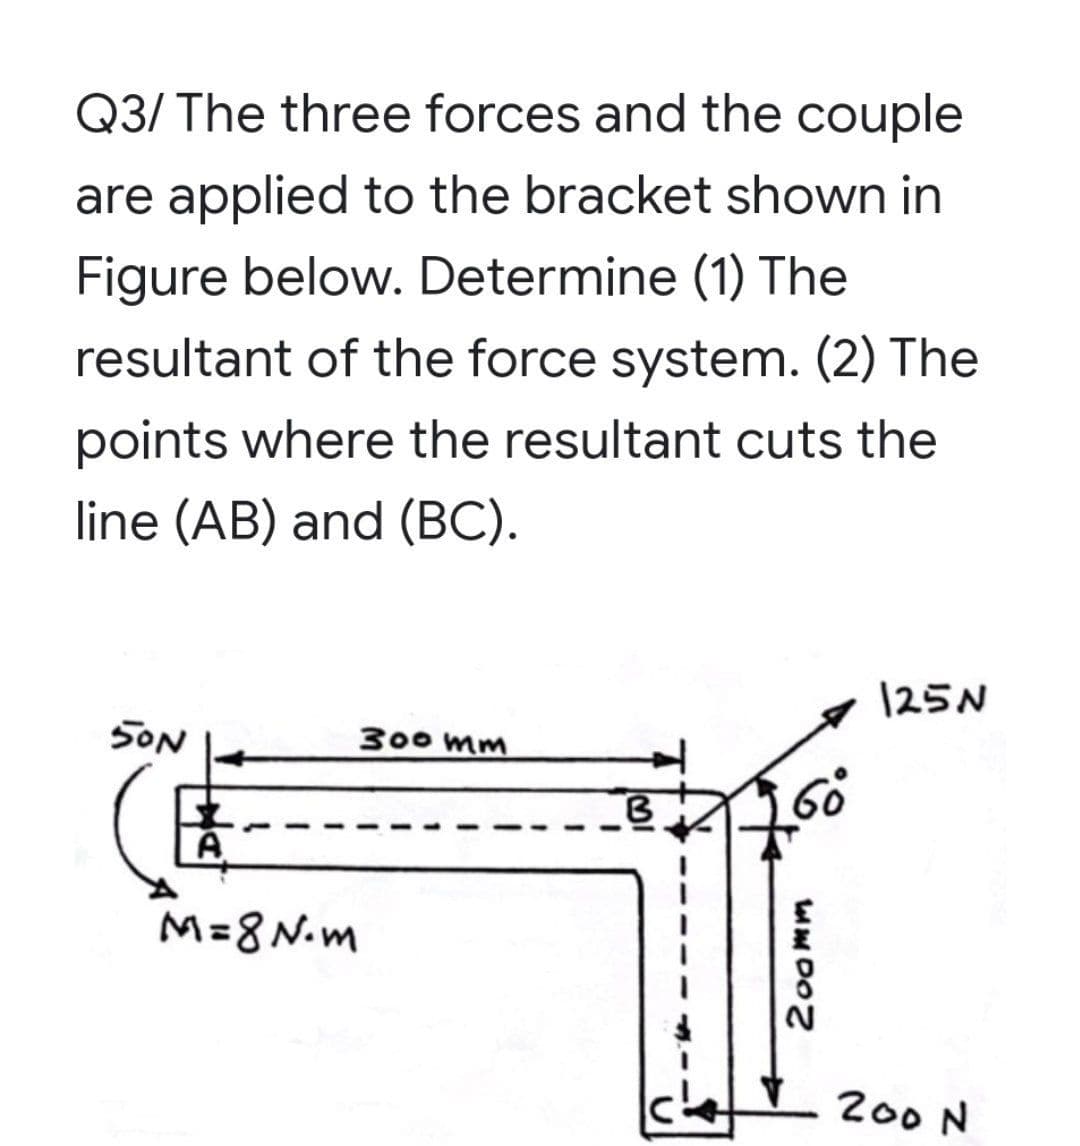 Q3/ The three forces and the couple
are applied to the bracket shown in
Figure below. Determine (1) The
resultant of the force system. (2) The
points where the resultant cuts the
line (AB) and (BC).
125N
SON
300 mm
A.
M=8 N.m
200 N
